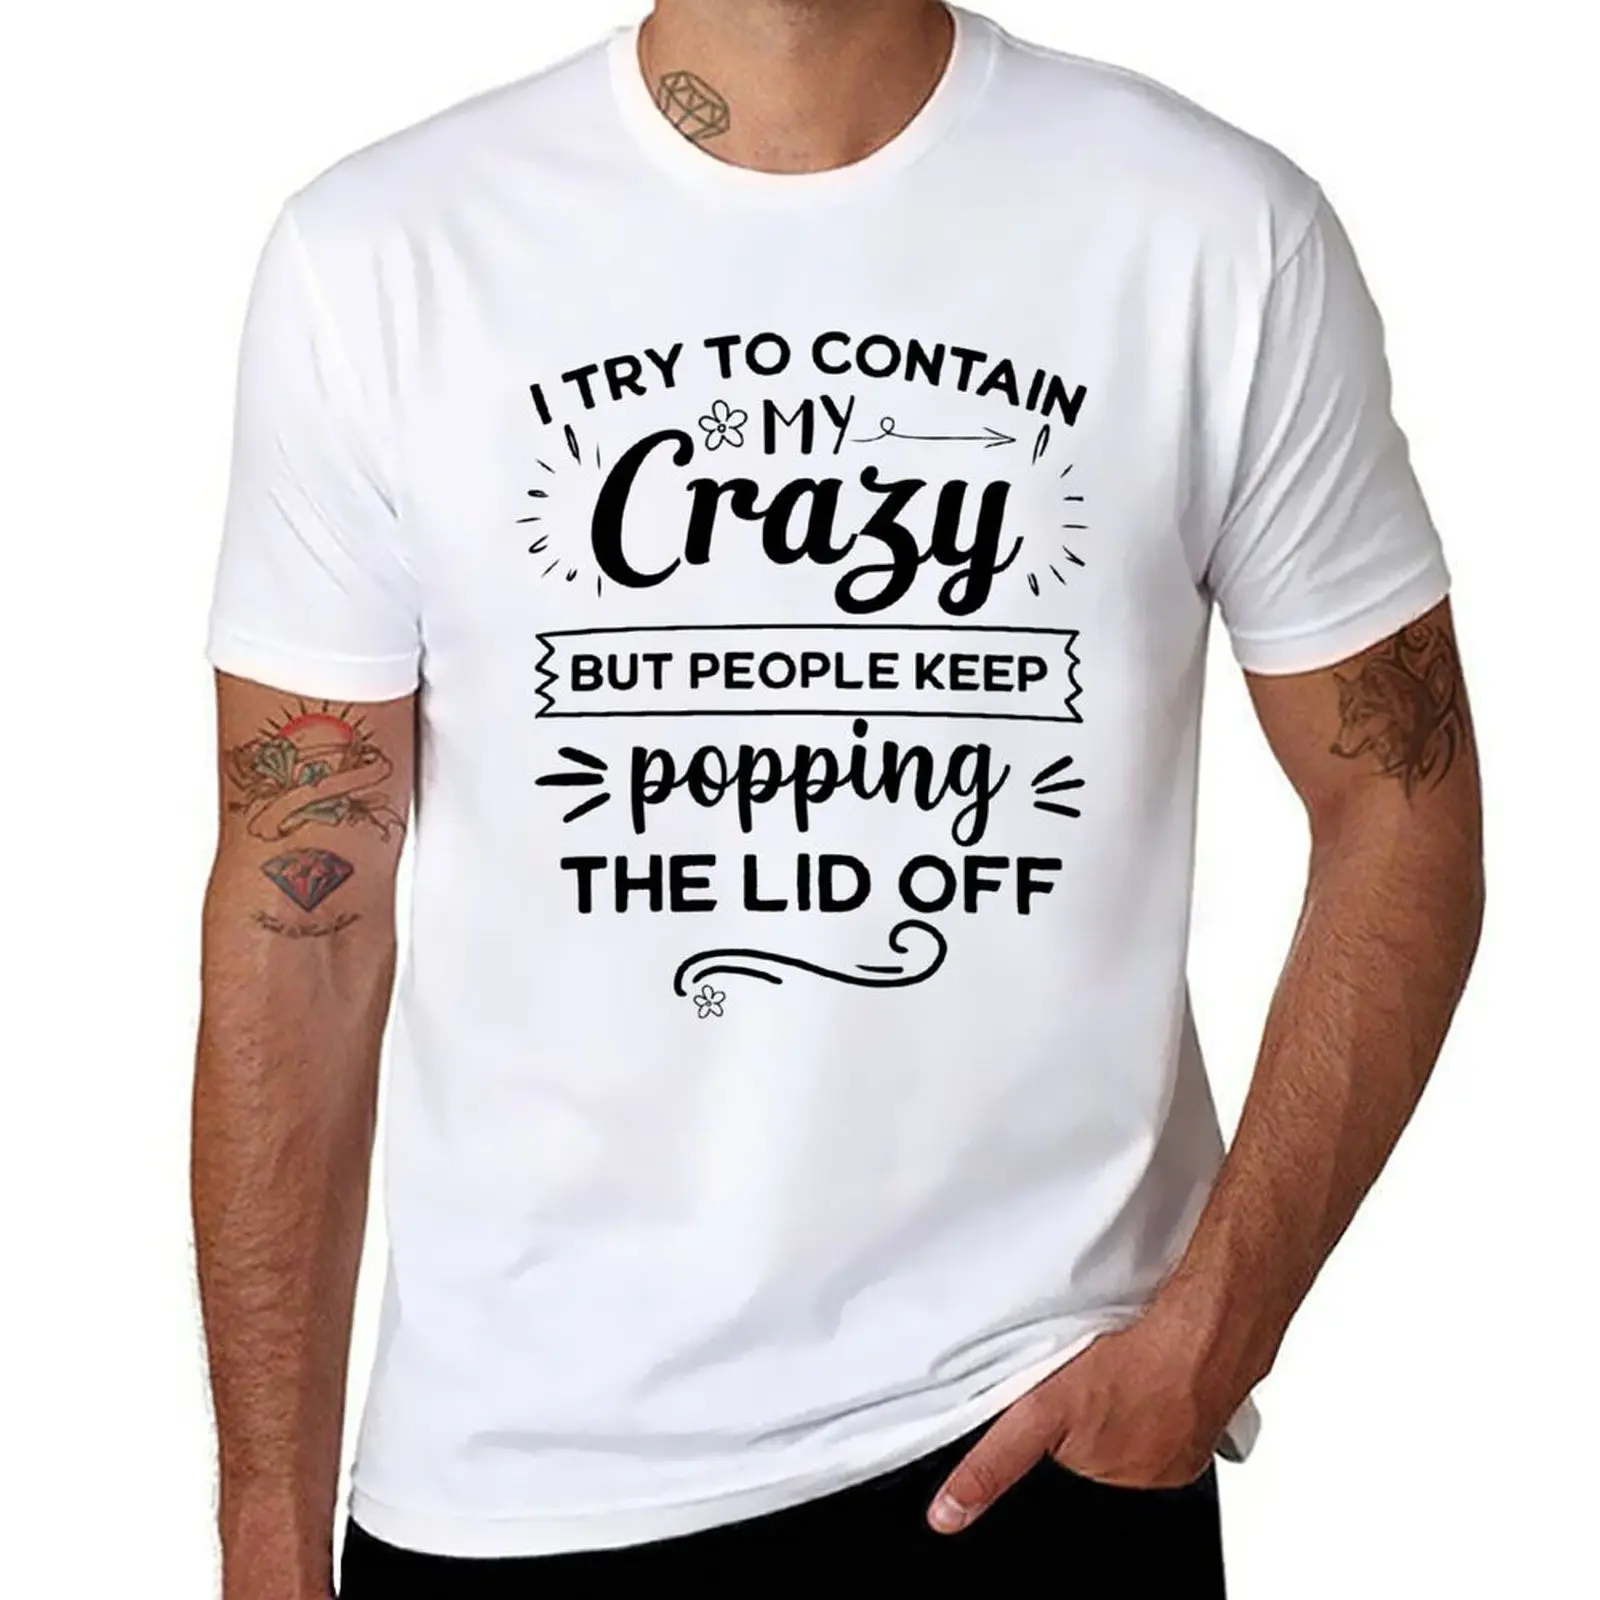 

New I try to contain my Crazy but people keep popping the lid off T-Shirt funny t shirt custom t shirts men graphic t shirts